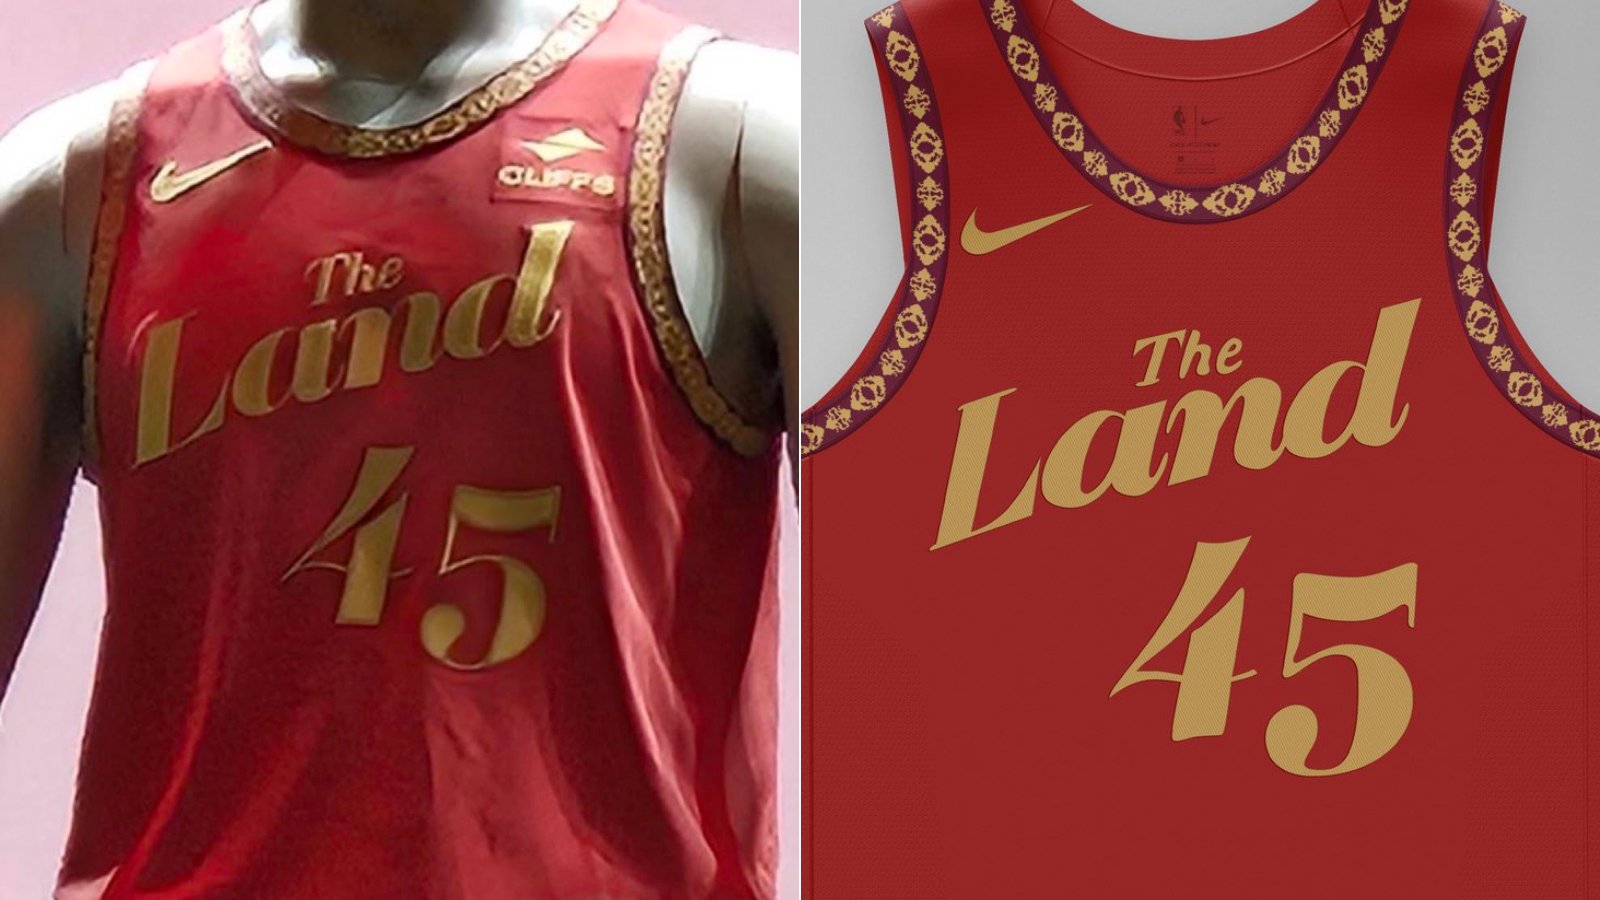 Cavaliers New City Edition Jersey Unveiling Party Goes Wrong With Fans